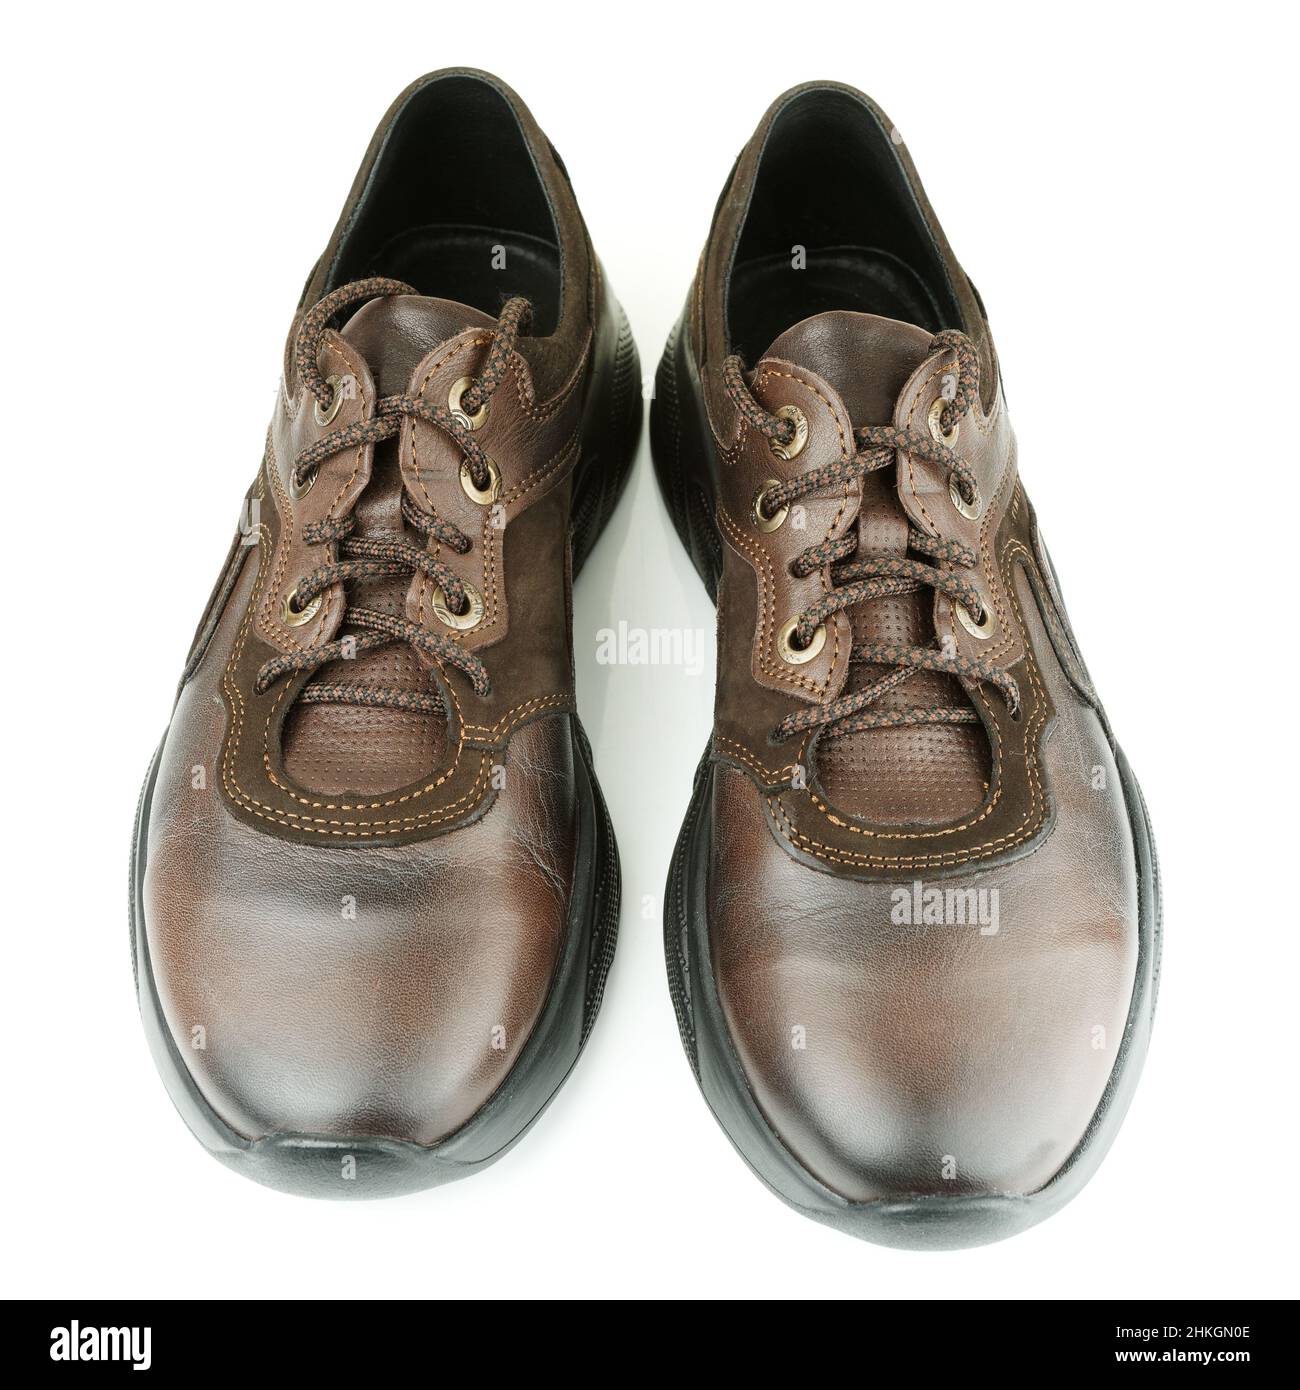 Pair of brown leather walking shoes on white background Stock Photo